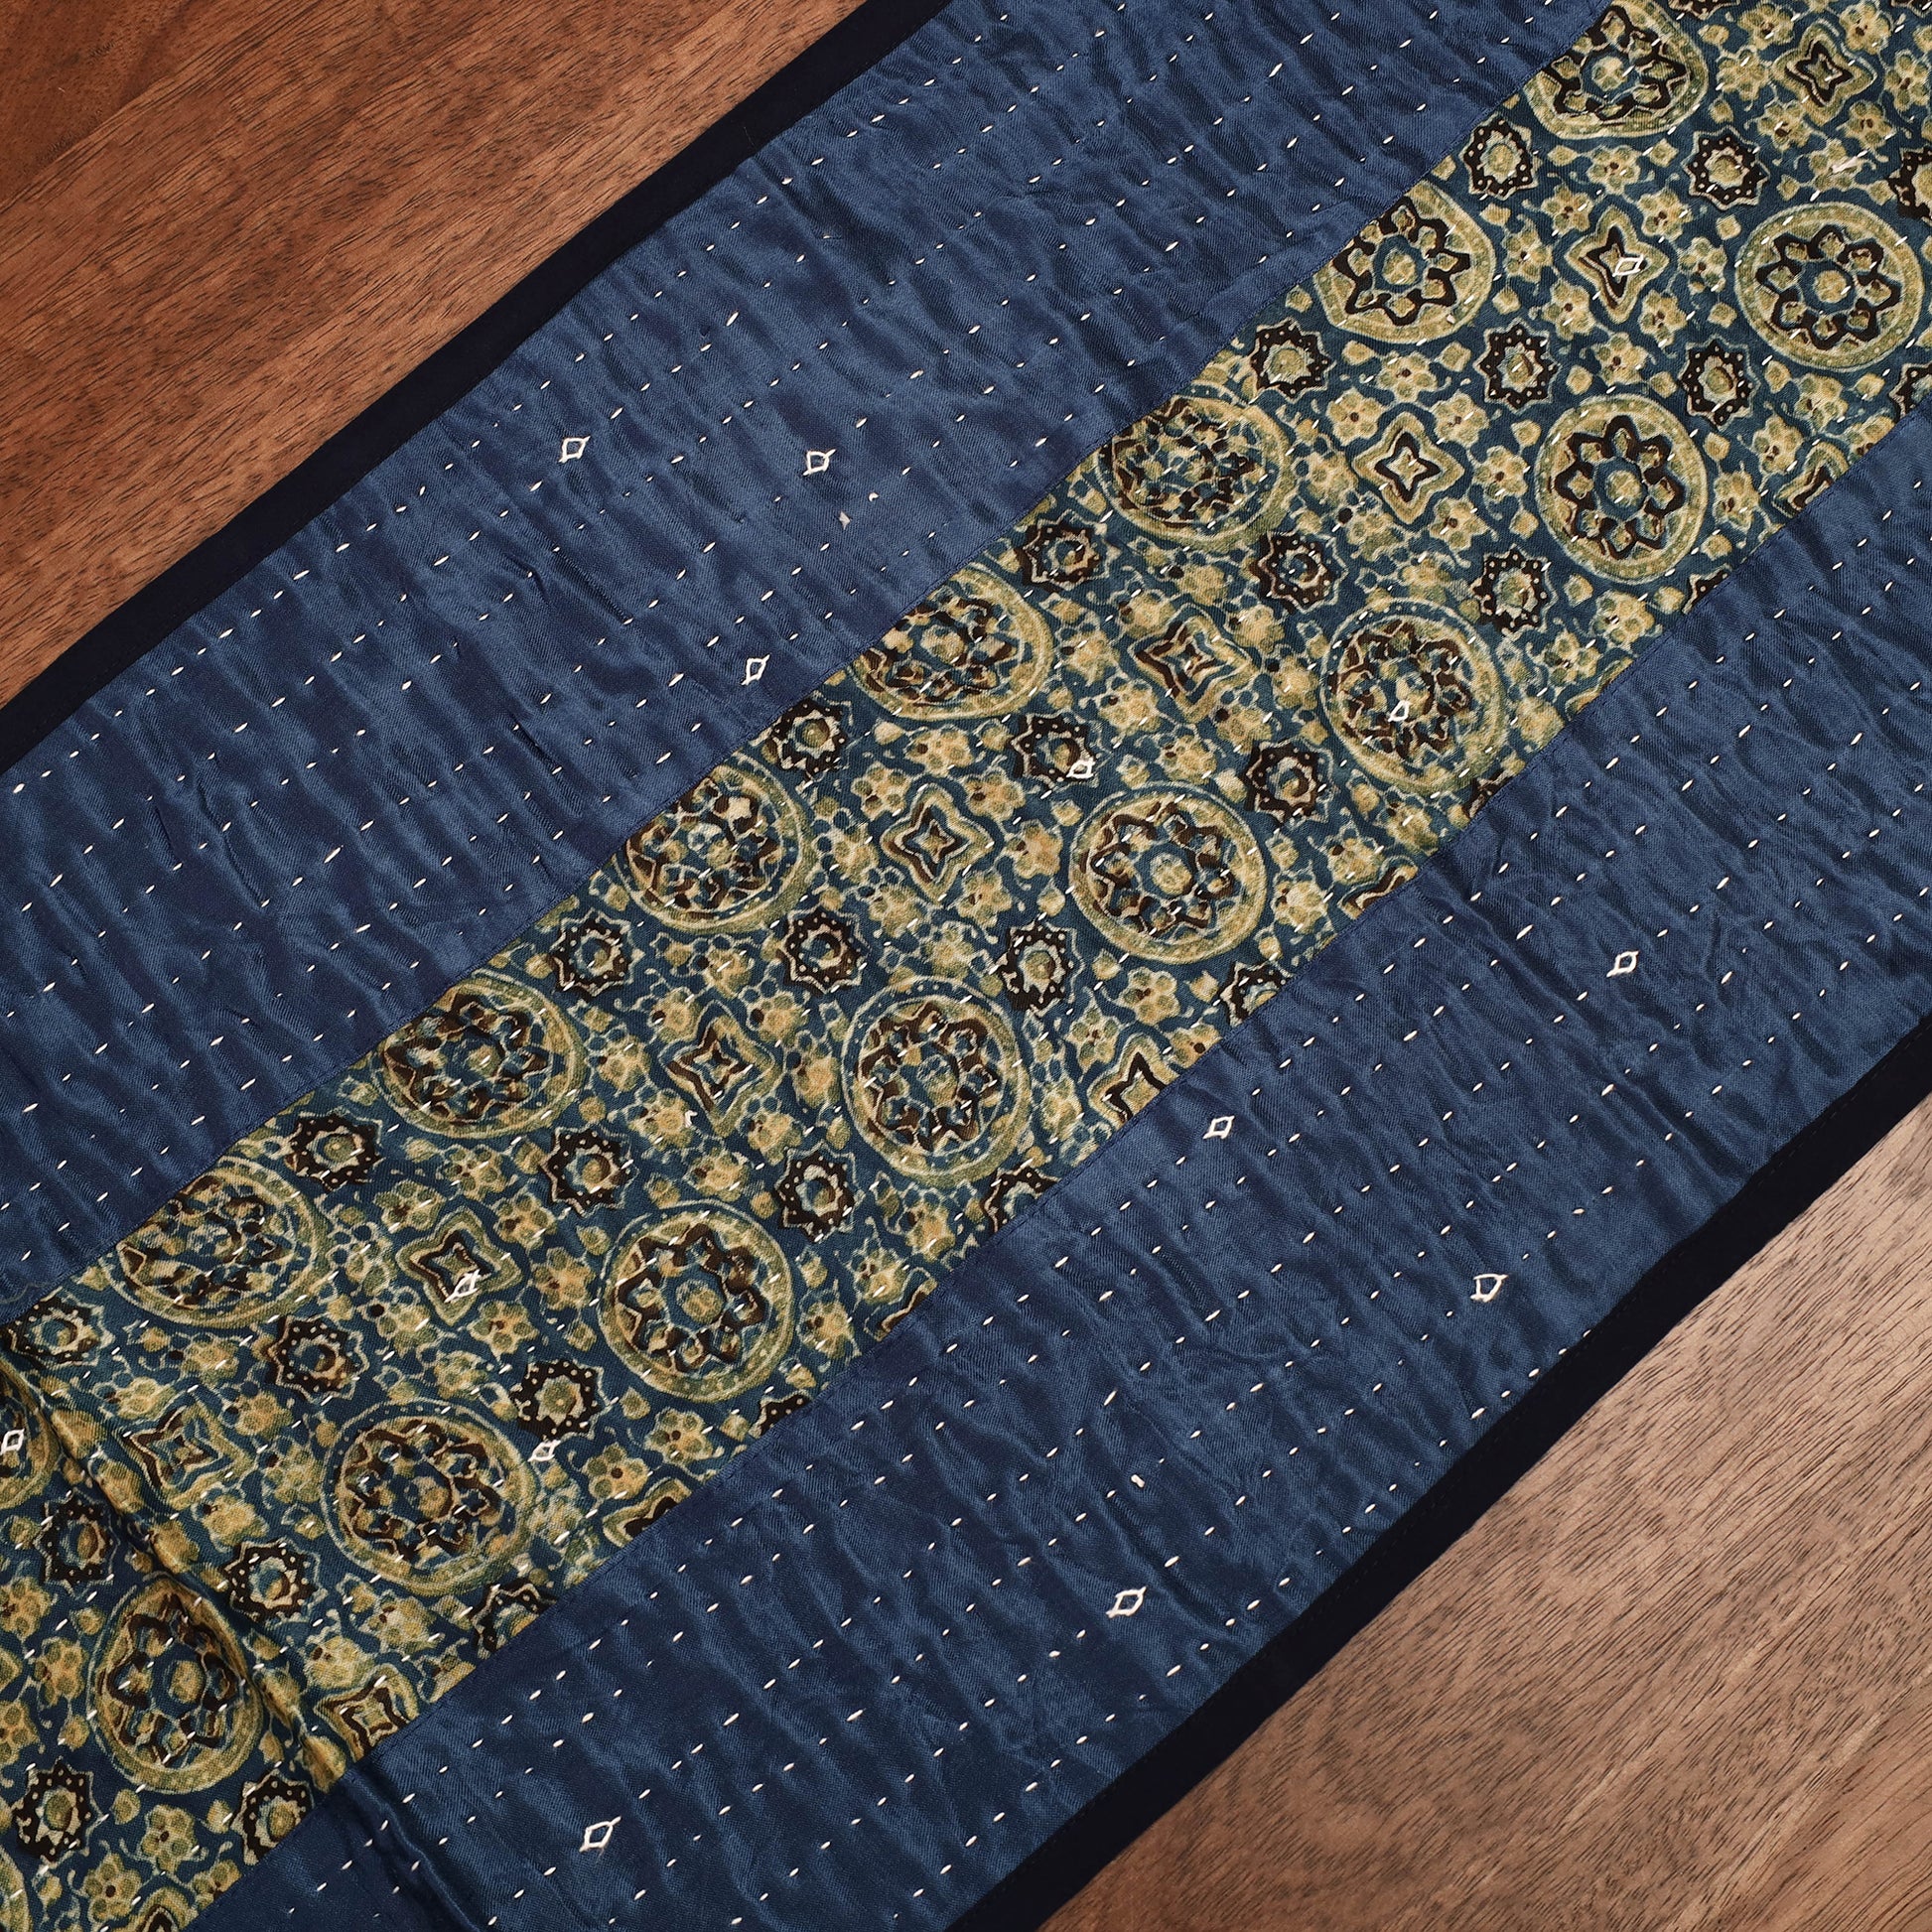 Patchwork Table Runner